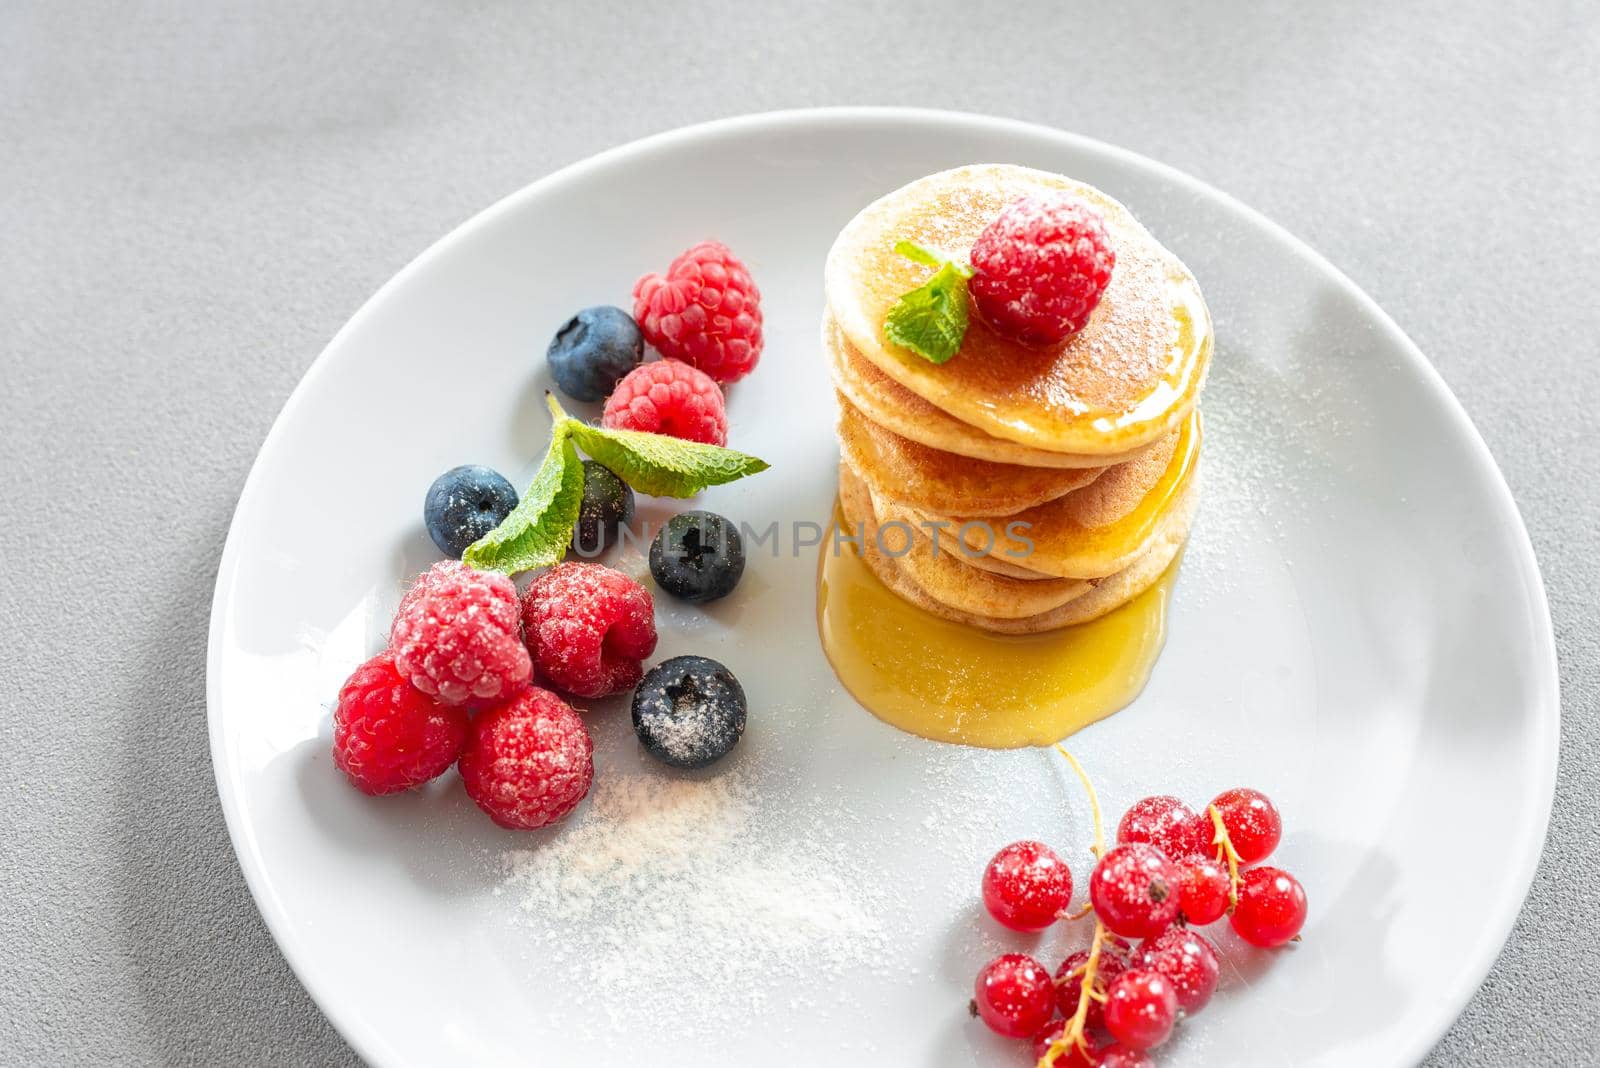 Food for breakfast healthy eating. Pancakes with honey. Homemade pancakes on a white background. European breakfast pancakes and berries. Pancakes without butter with berries. Food for vegetarians and for dieting. American Pancakes Mini by gulyaevstudio